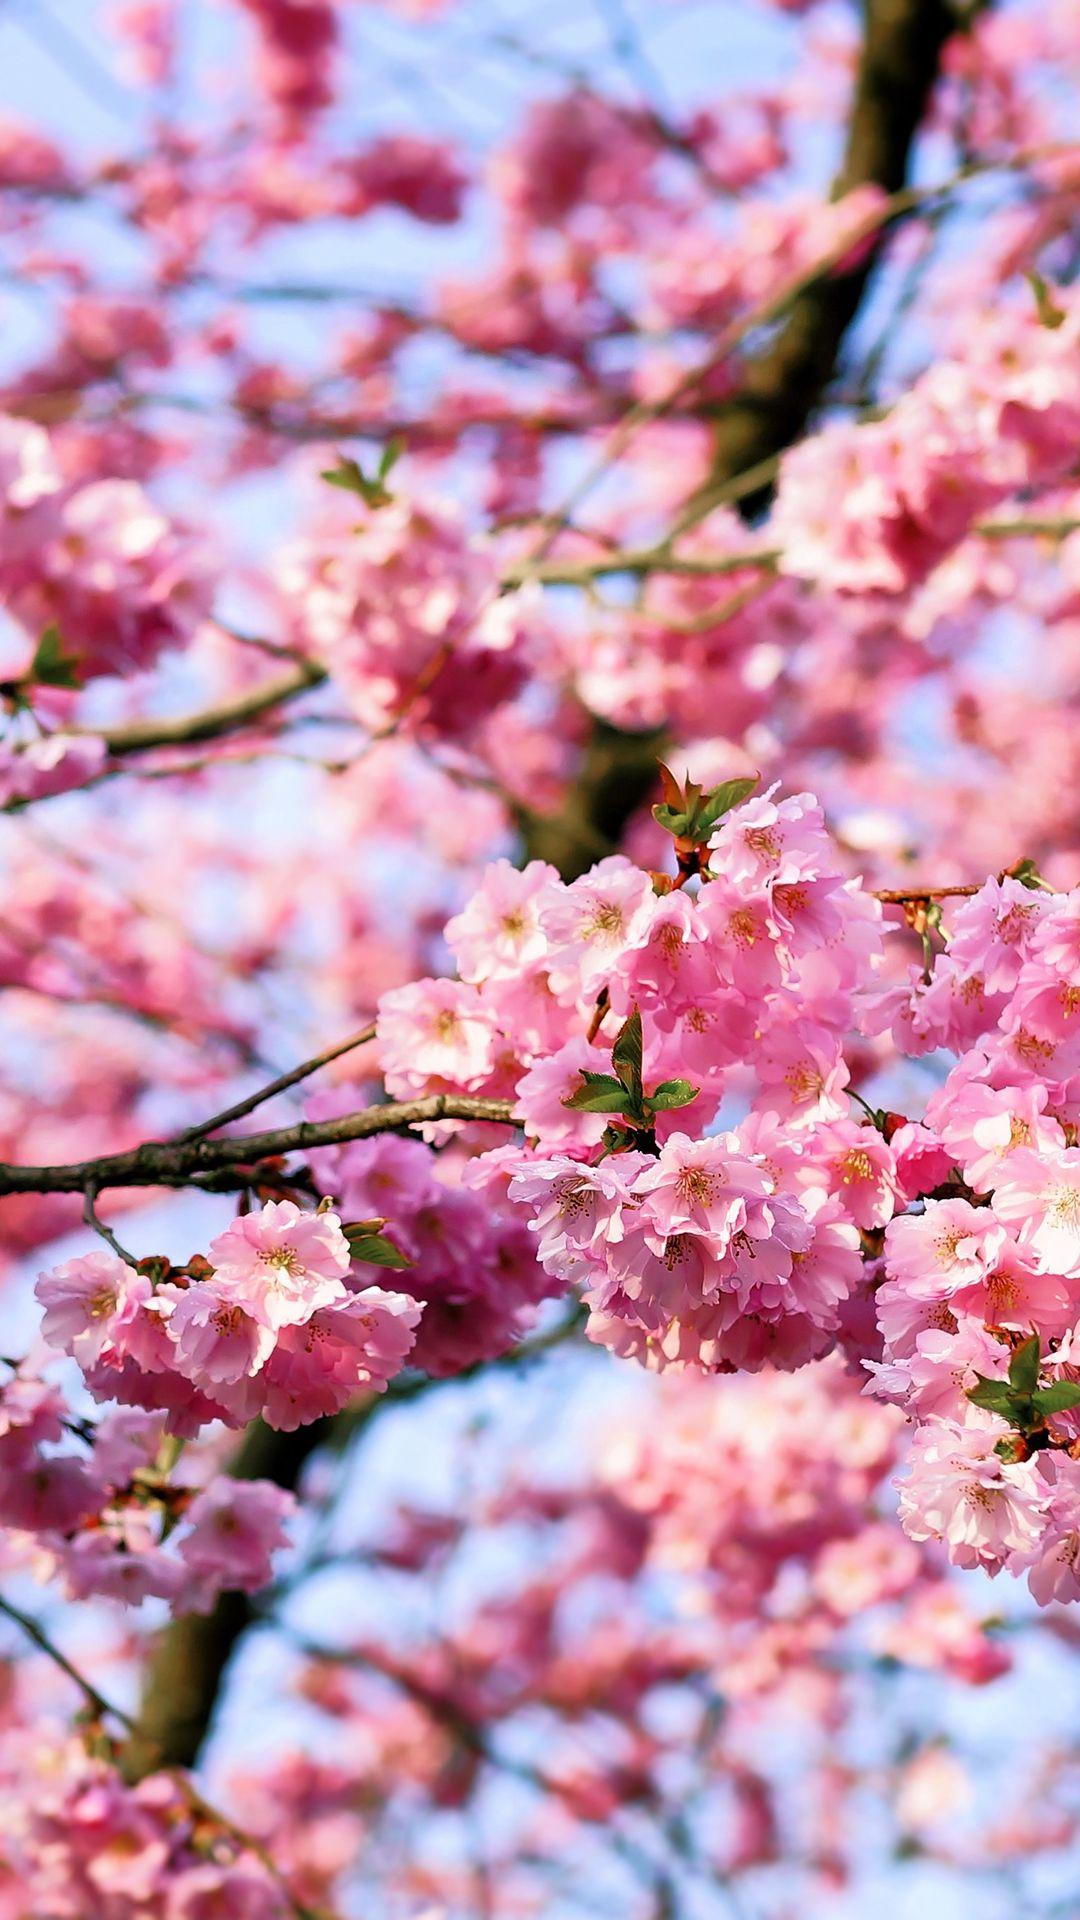 Cherry Blossom Wallpapers - Top Free Cherry Blossom ...